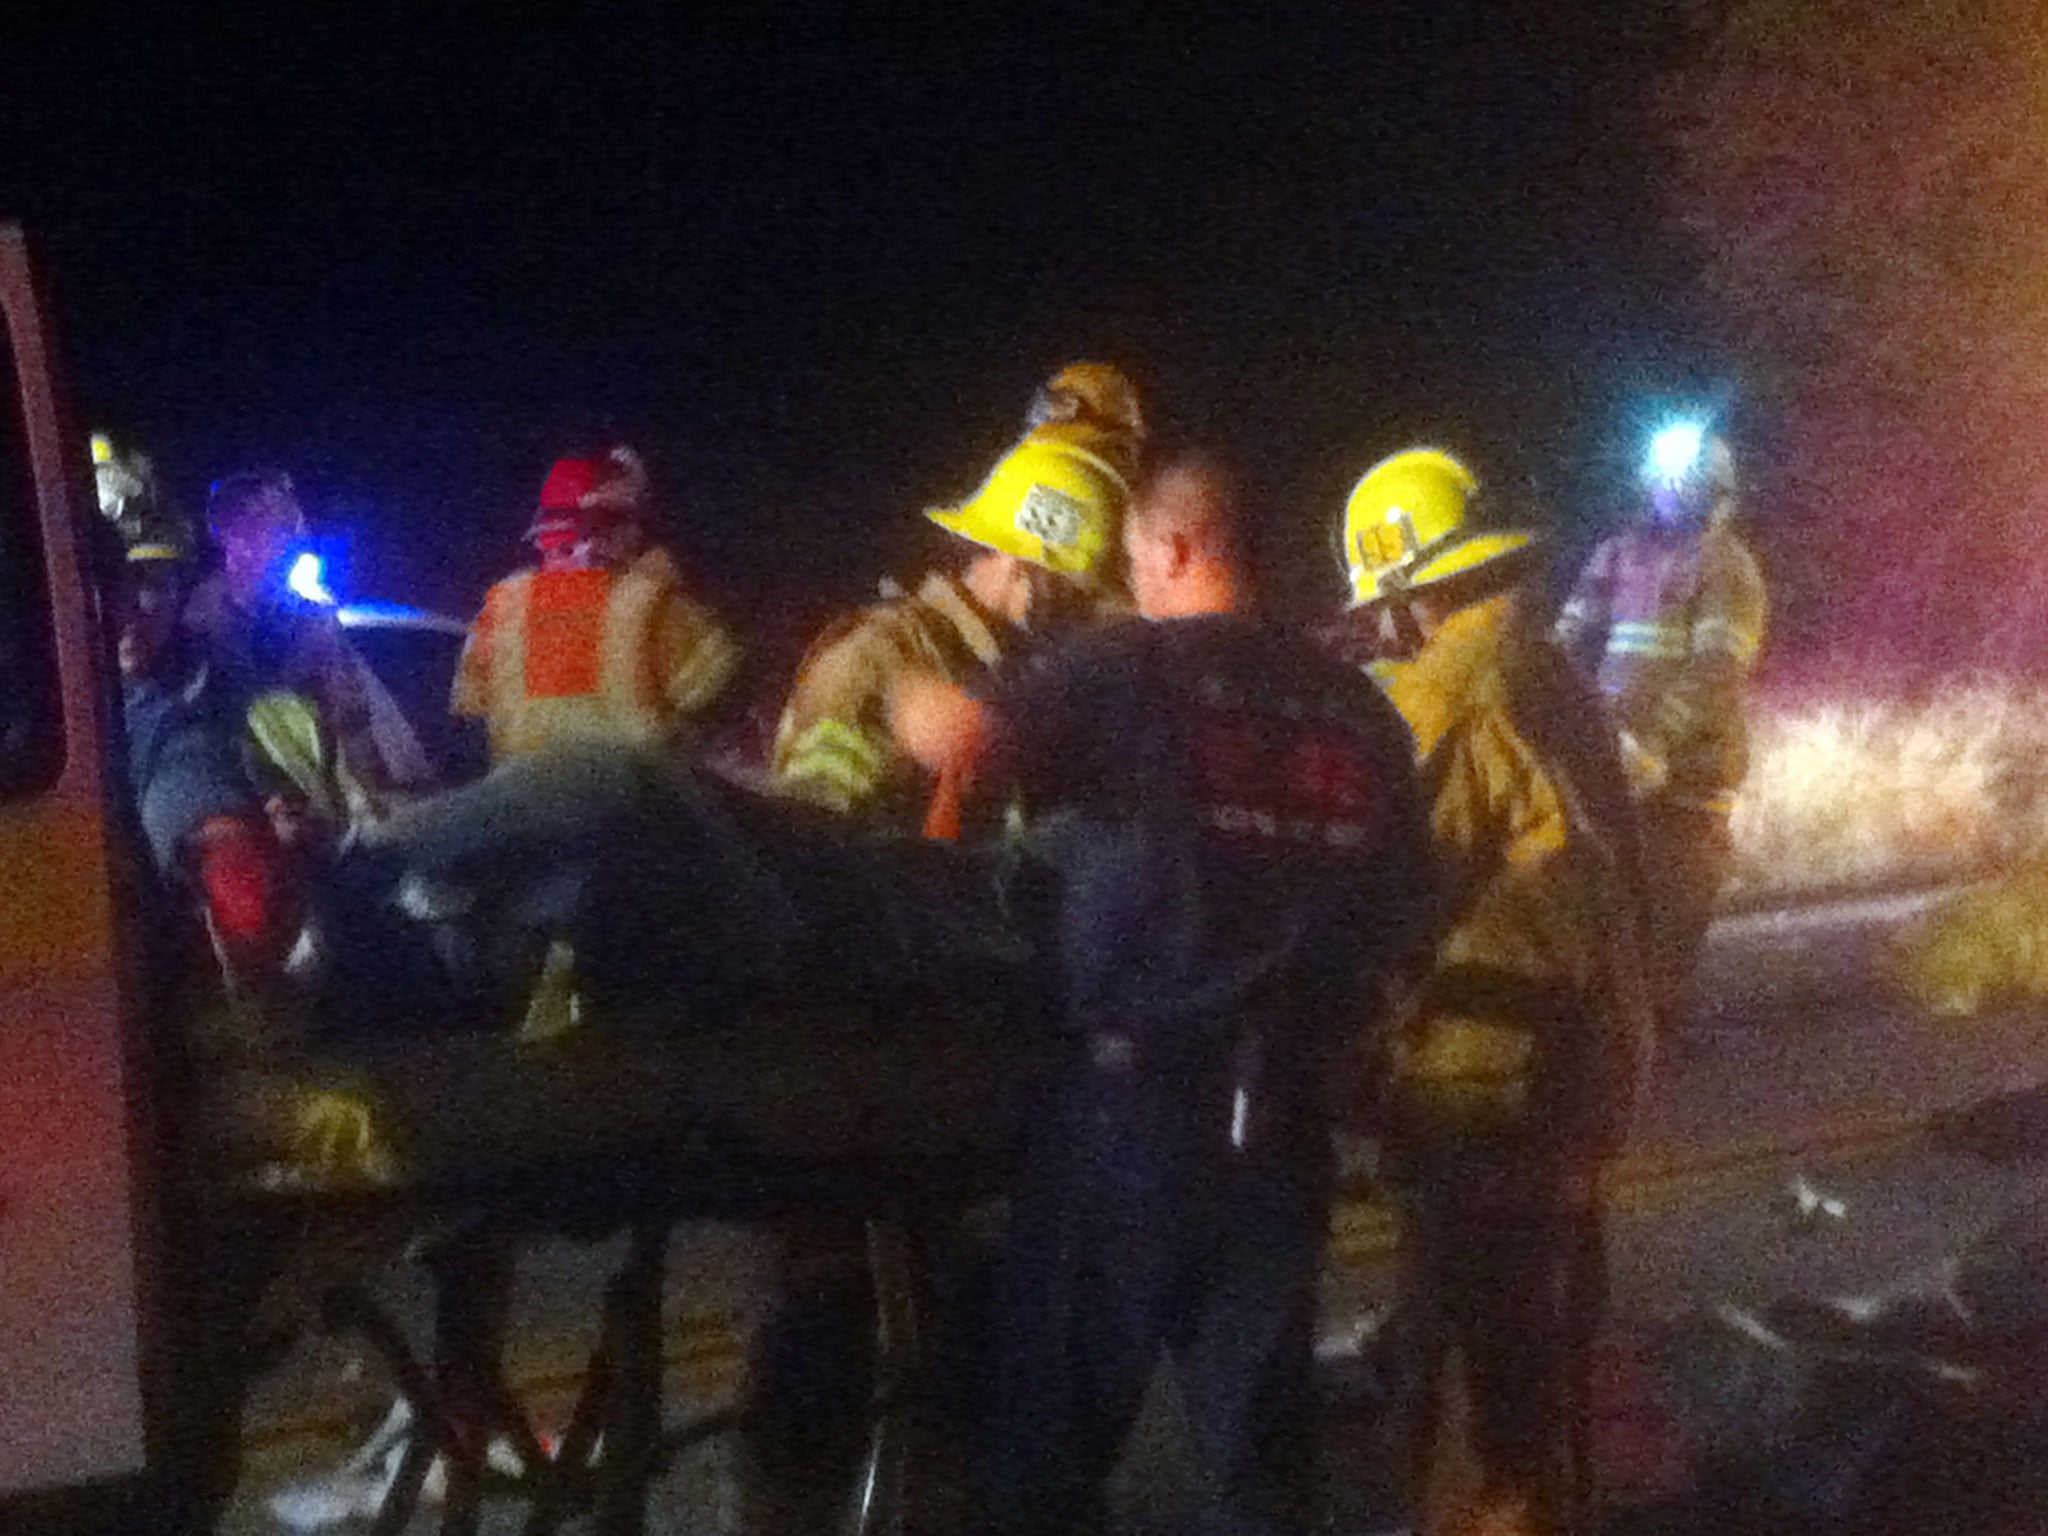 Emergency personnel assist victims at the scene of the bus crash near Forest Falls